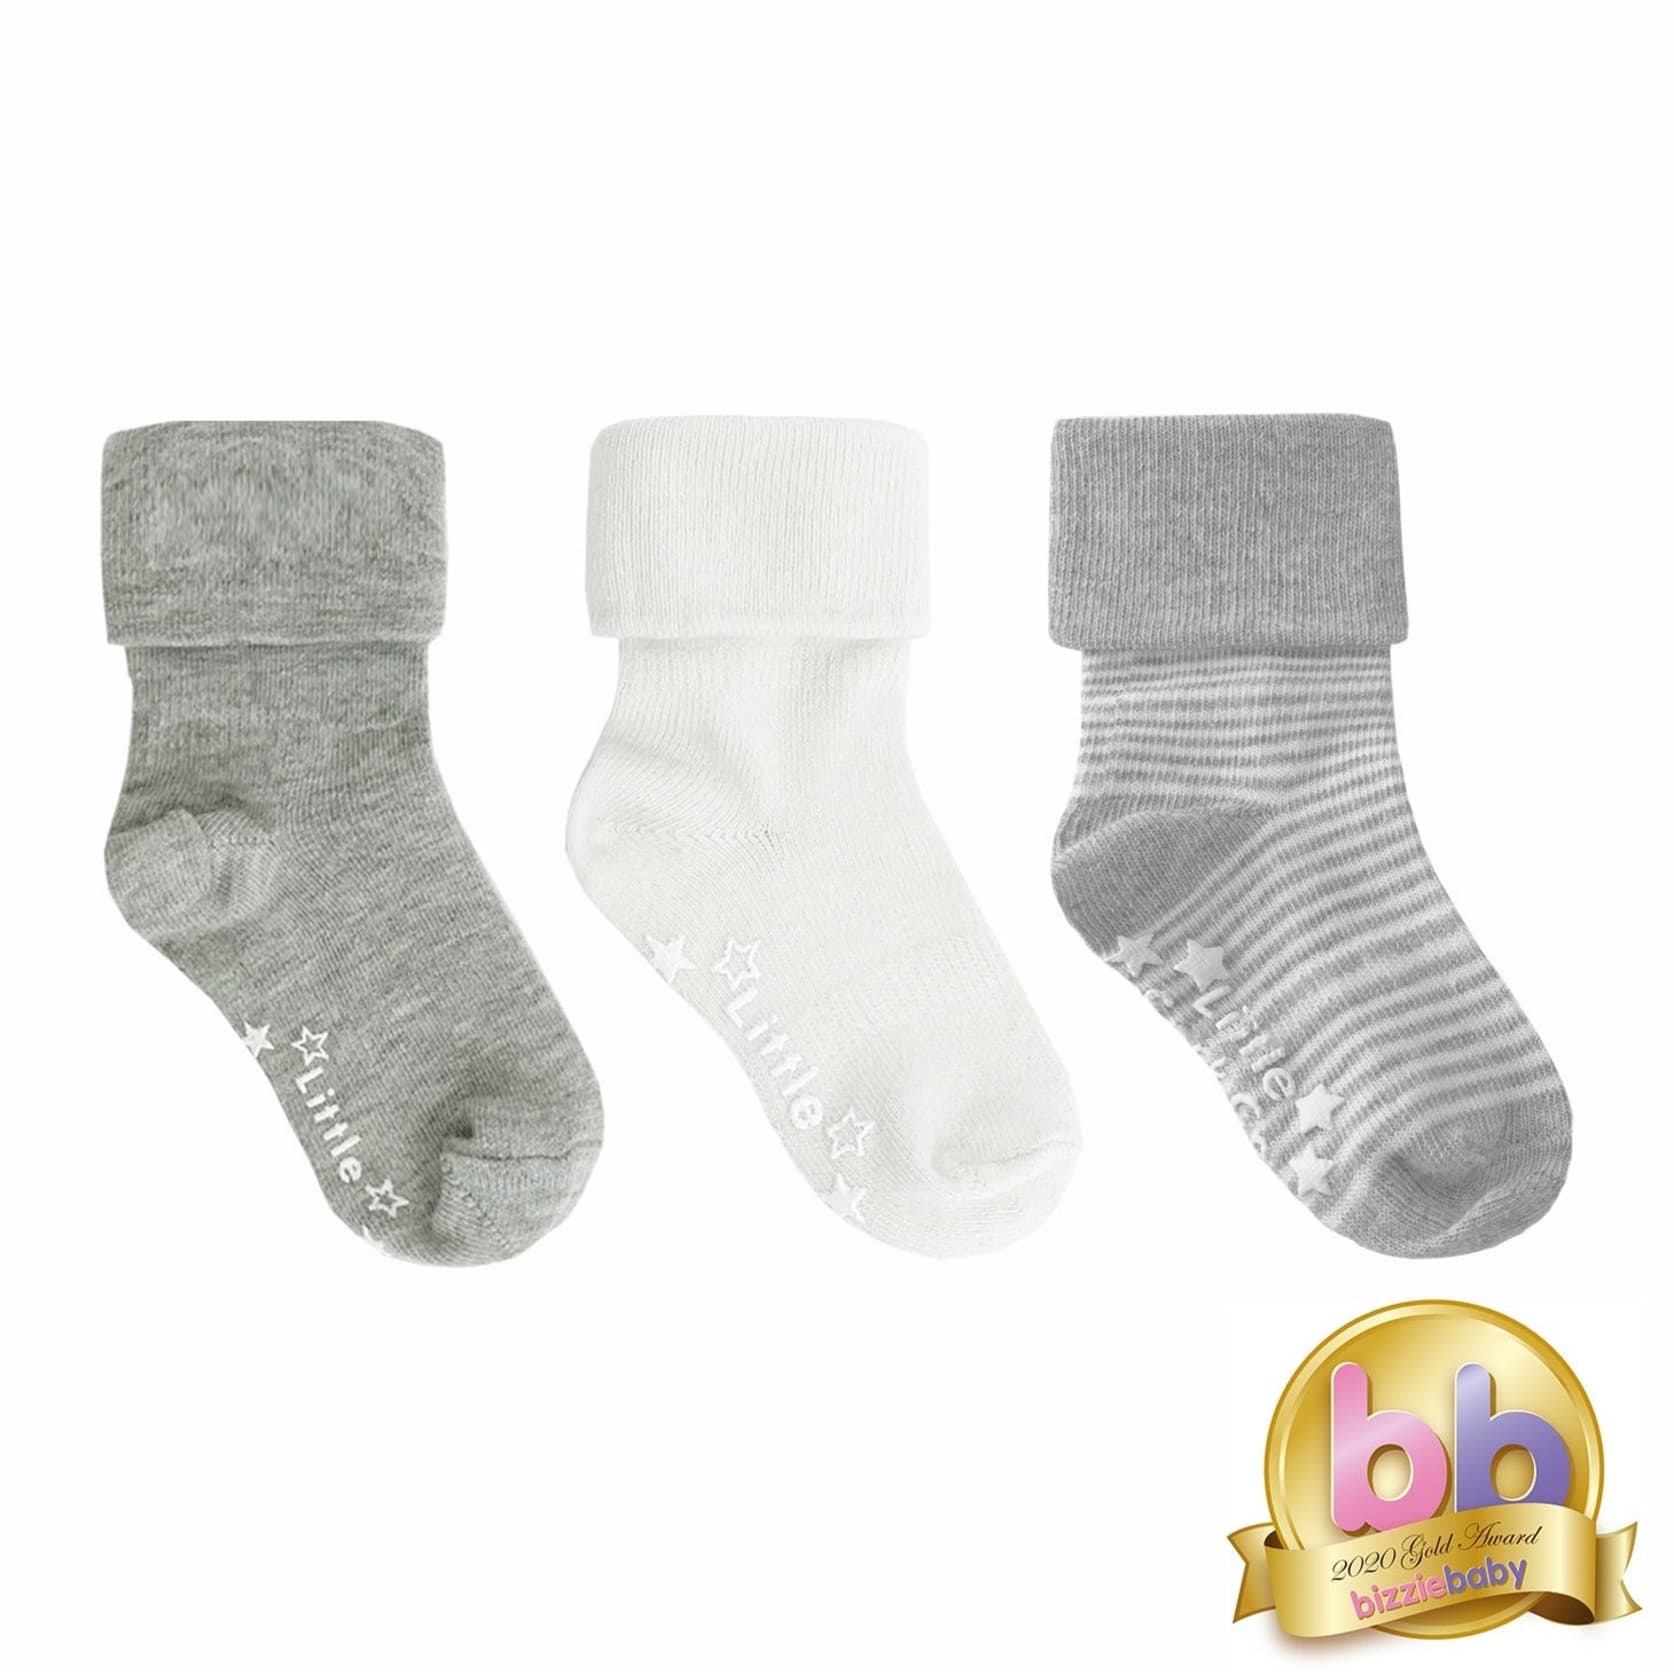 Non-Slip Stay On Baby and Toddler Socks - 3 Pack in White, Grey Marl Stripe and Grey Marl